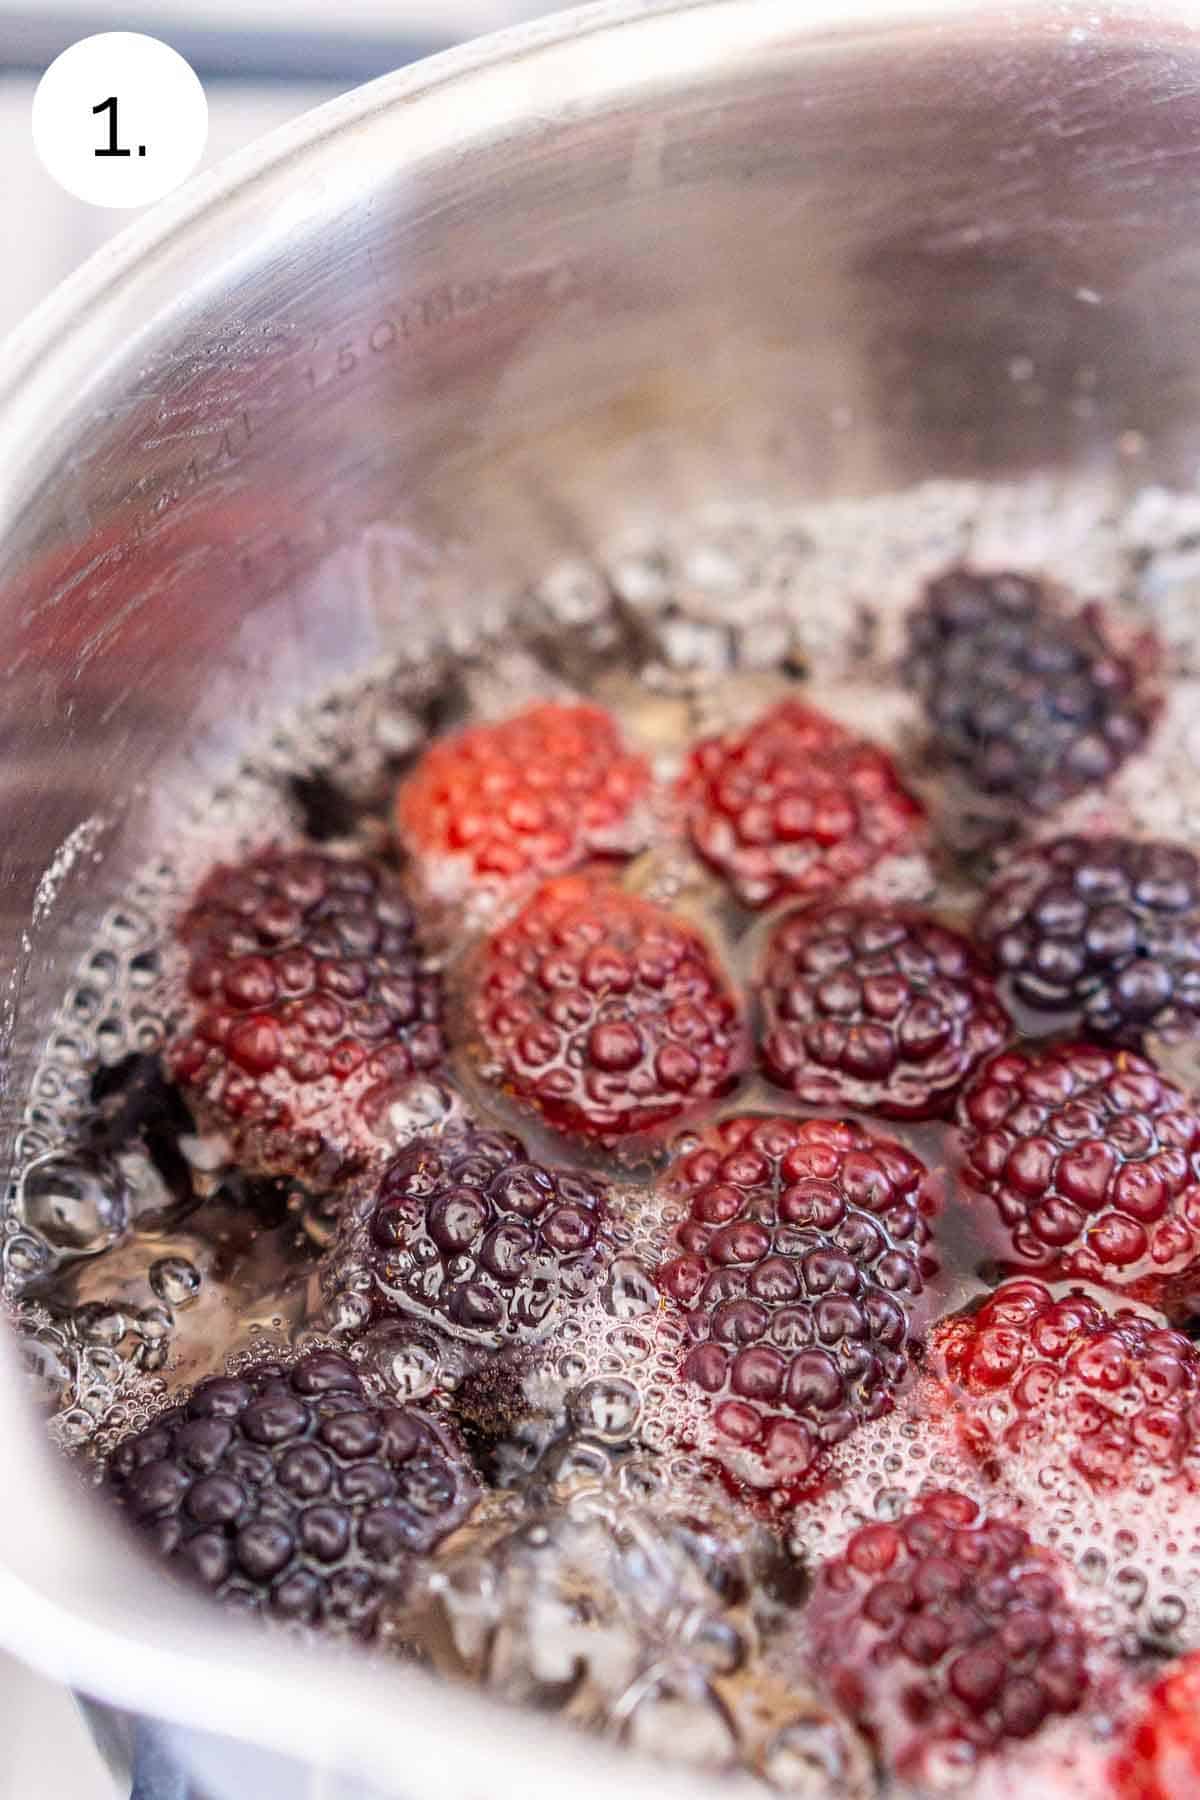 The blackberries, water and sugar boiling in a small stainless steel on the stove-top range.